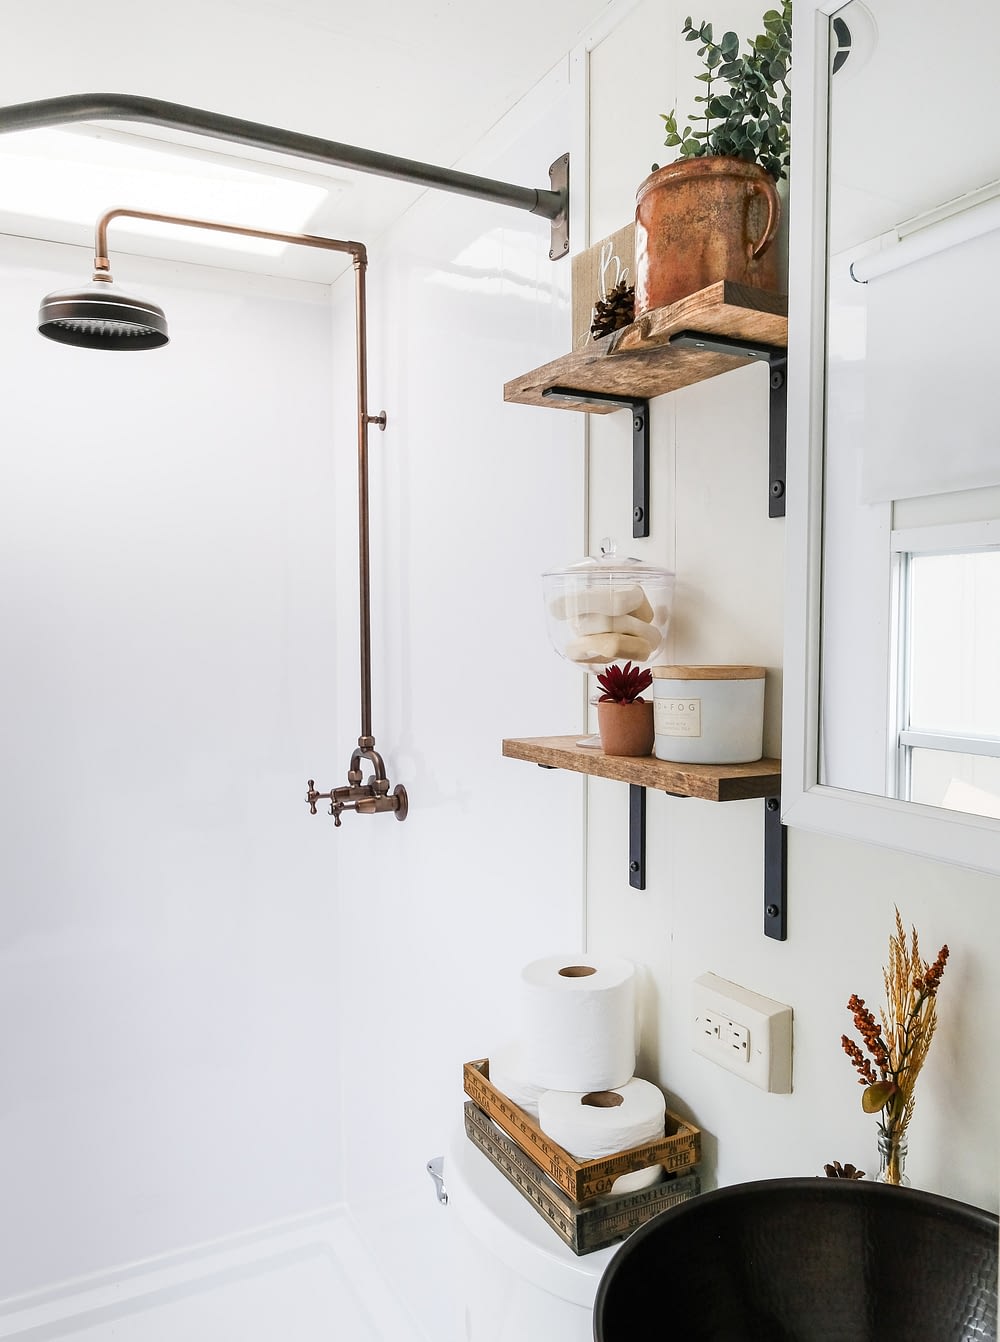 RV bathroom remodel with copper fixtures and open shelving